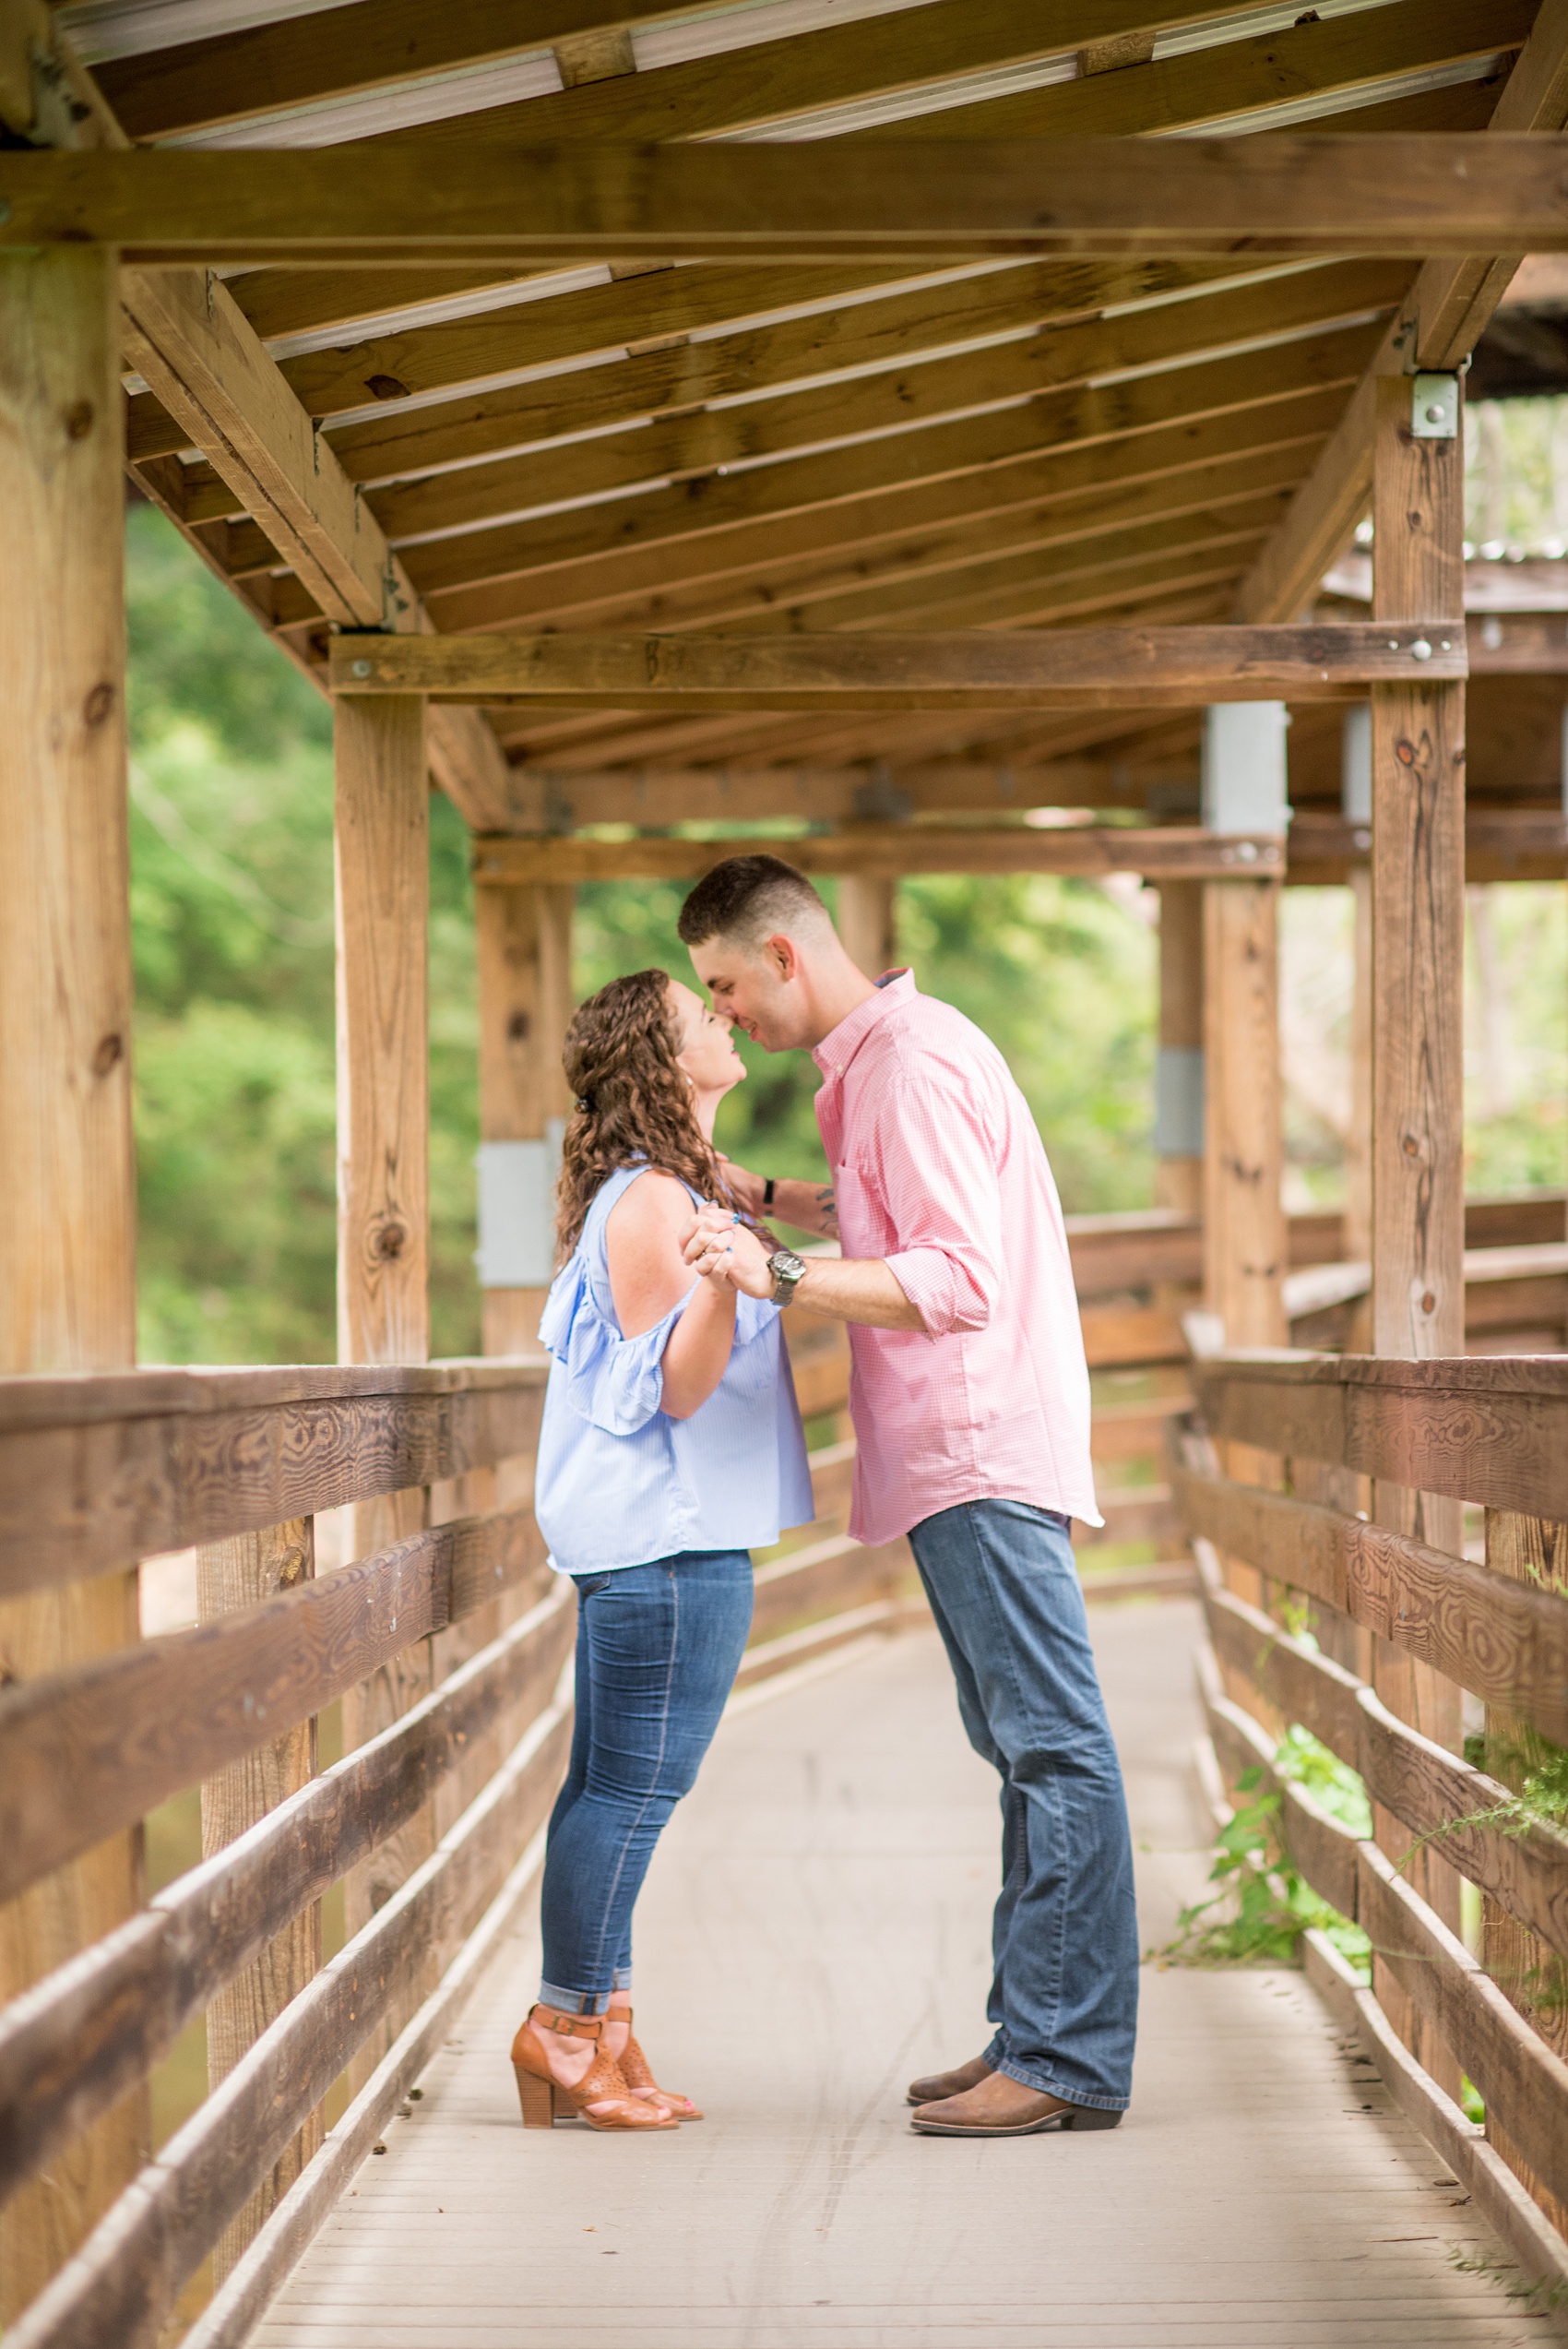 Mikkel Paige Photography photos of an engagement session at Eno Riverwalk in Hillsborough, North Carolina. Picture of bride and groom in a wooden tunnel.